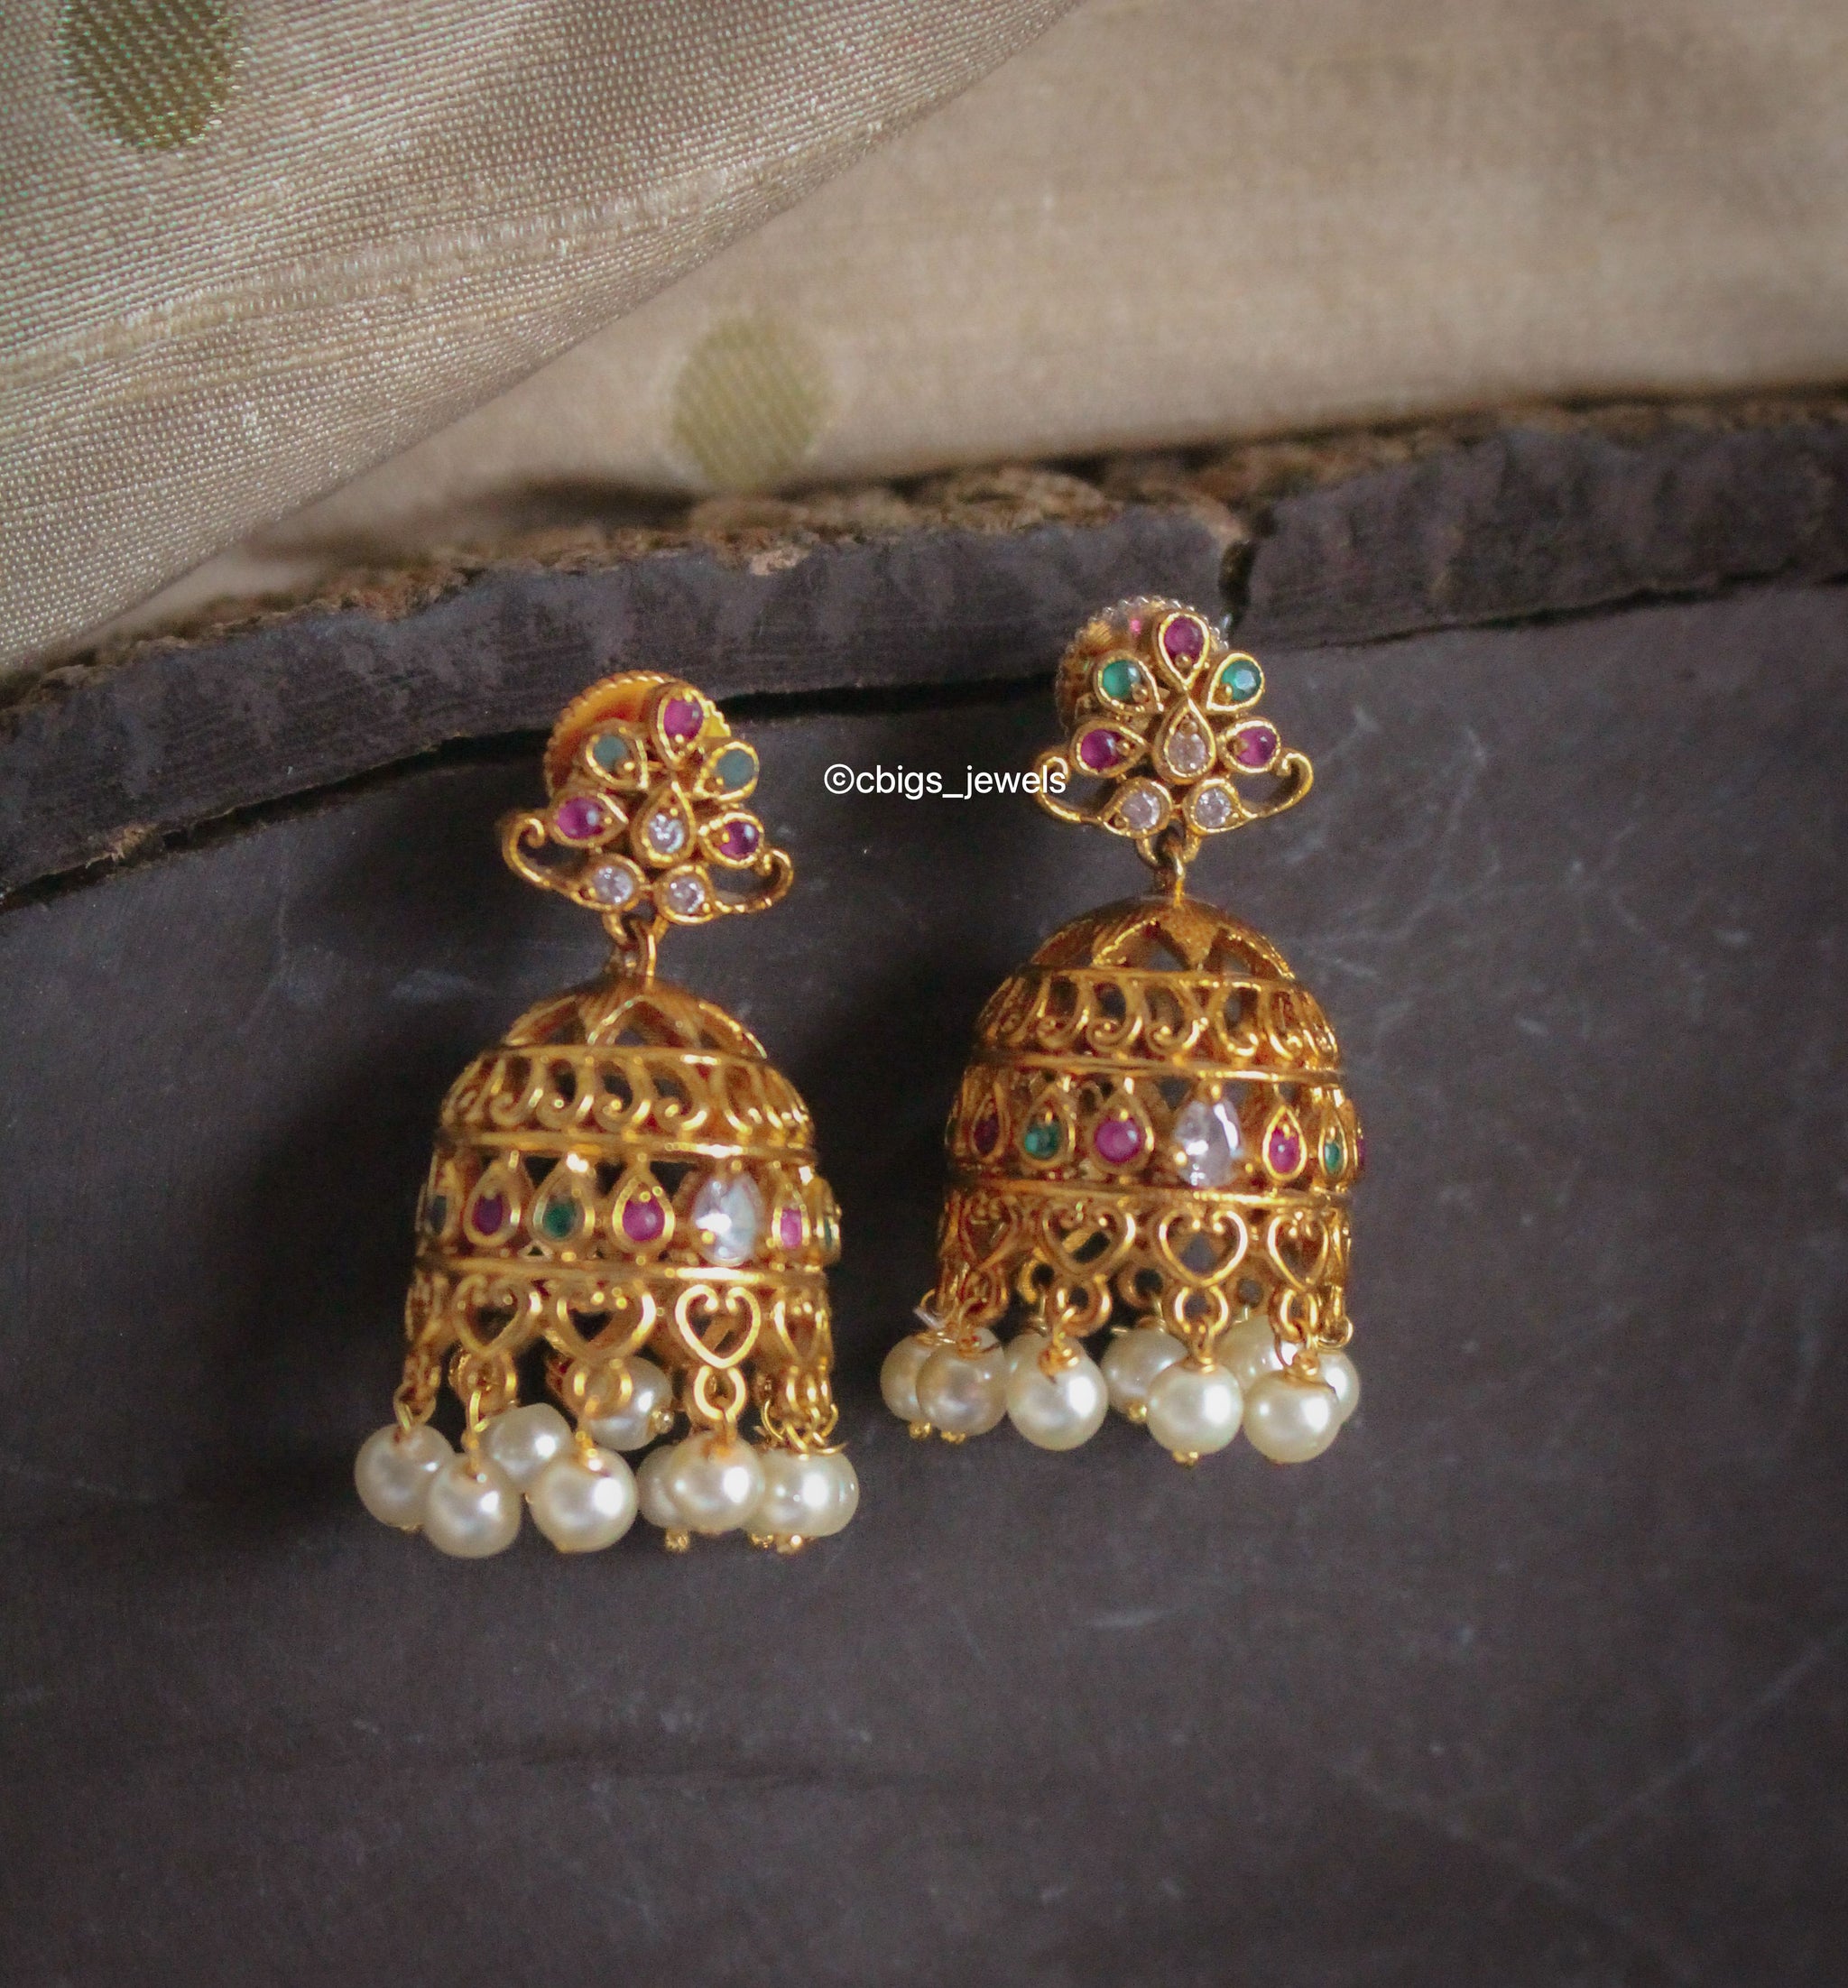 18KT gold Jhumka earrings signed weight 15 gm length 2 inches | eBay